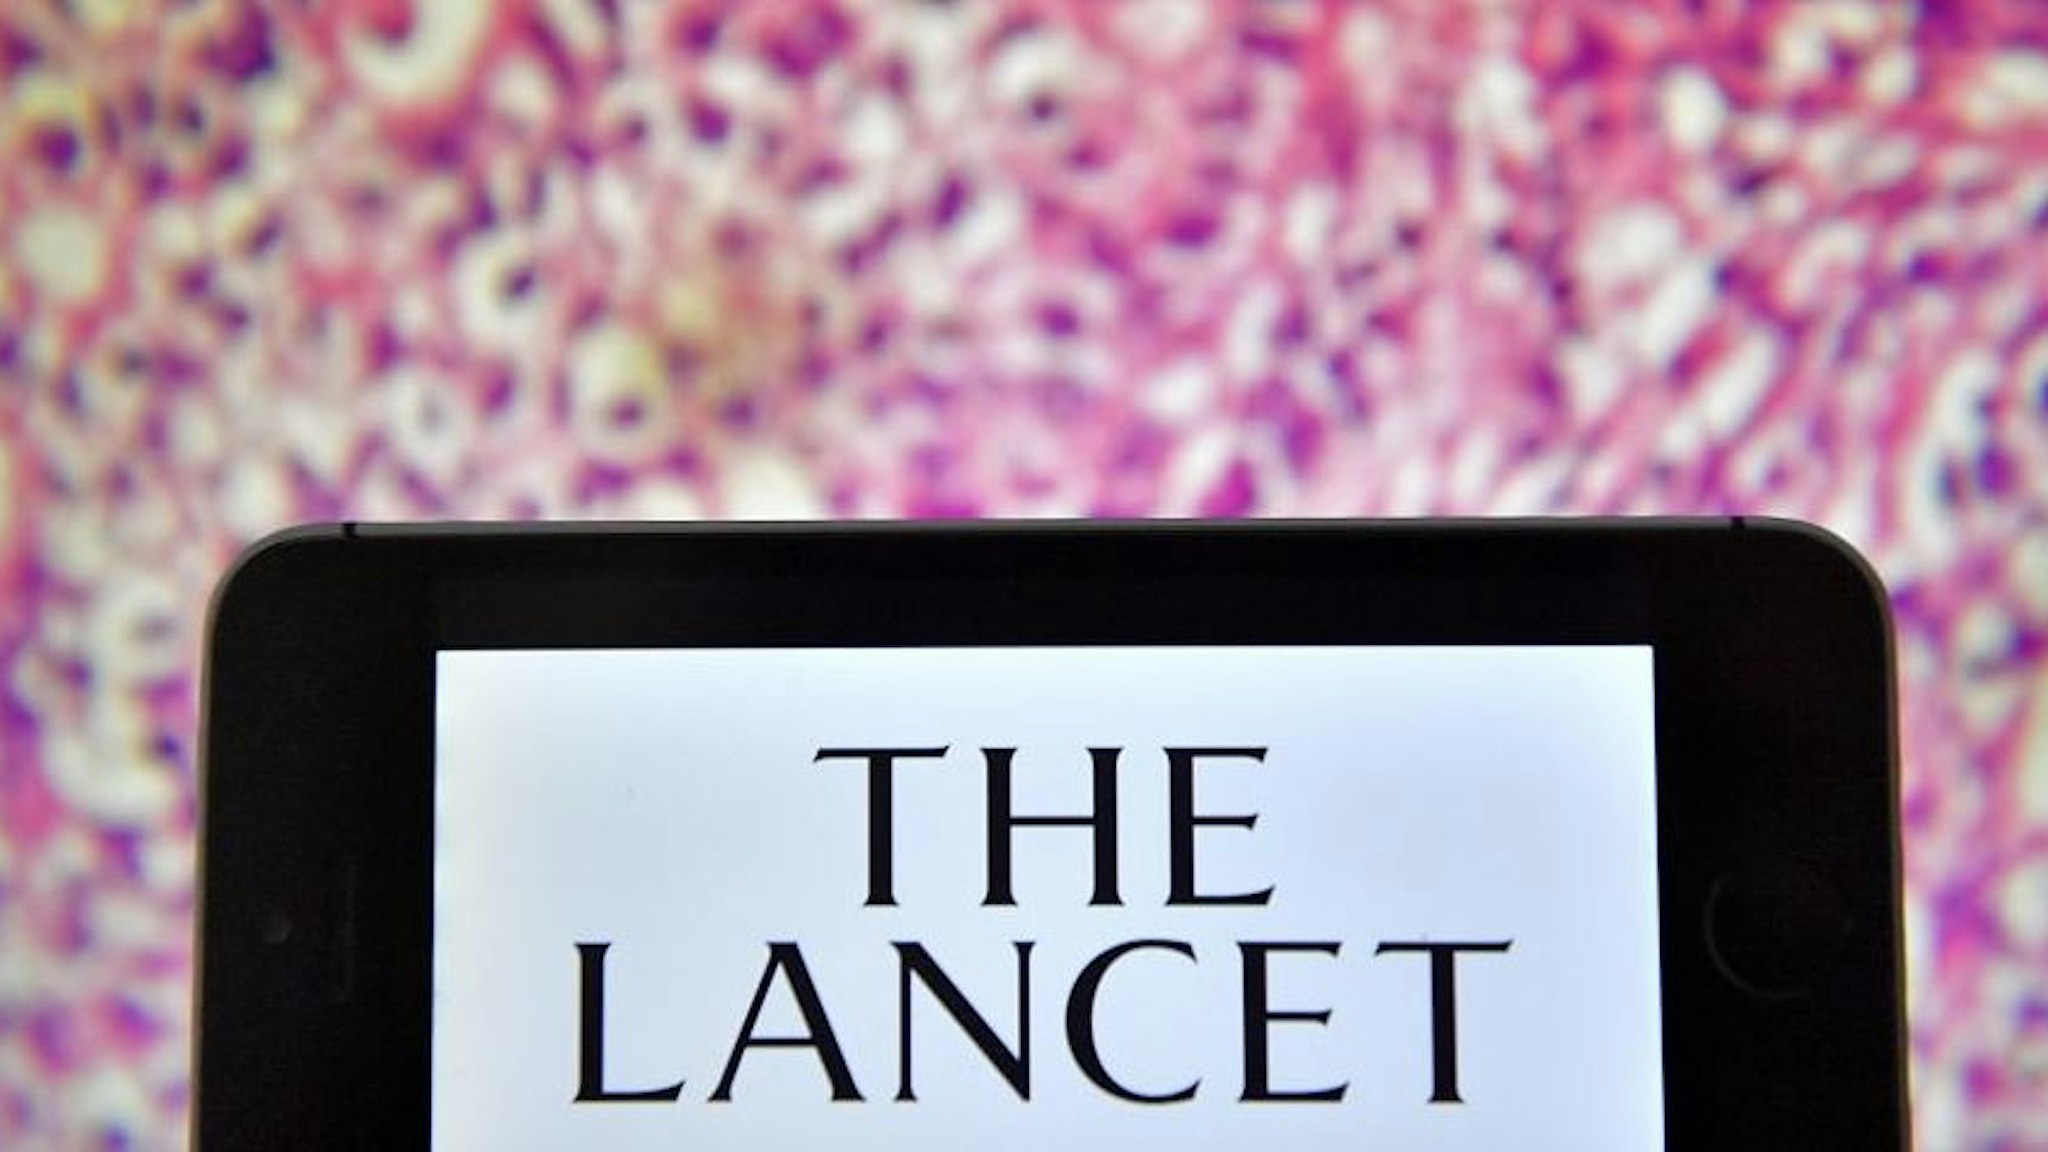 A picture taken on November 20, 2017 shows the logo of British peer-reviewed general medical journal The Lancet displayed on a computer's screen.